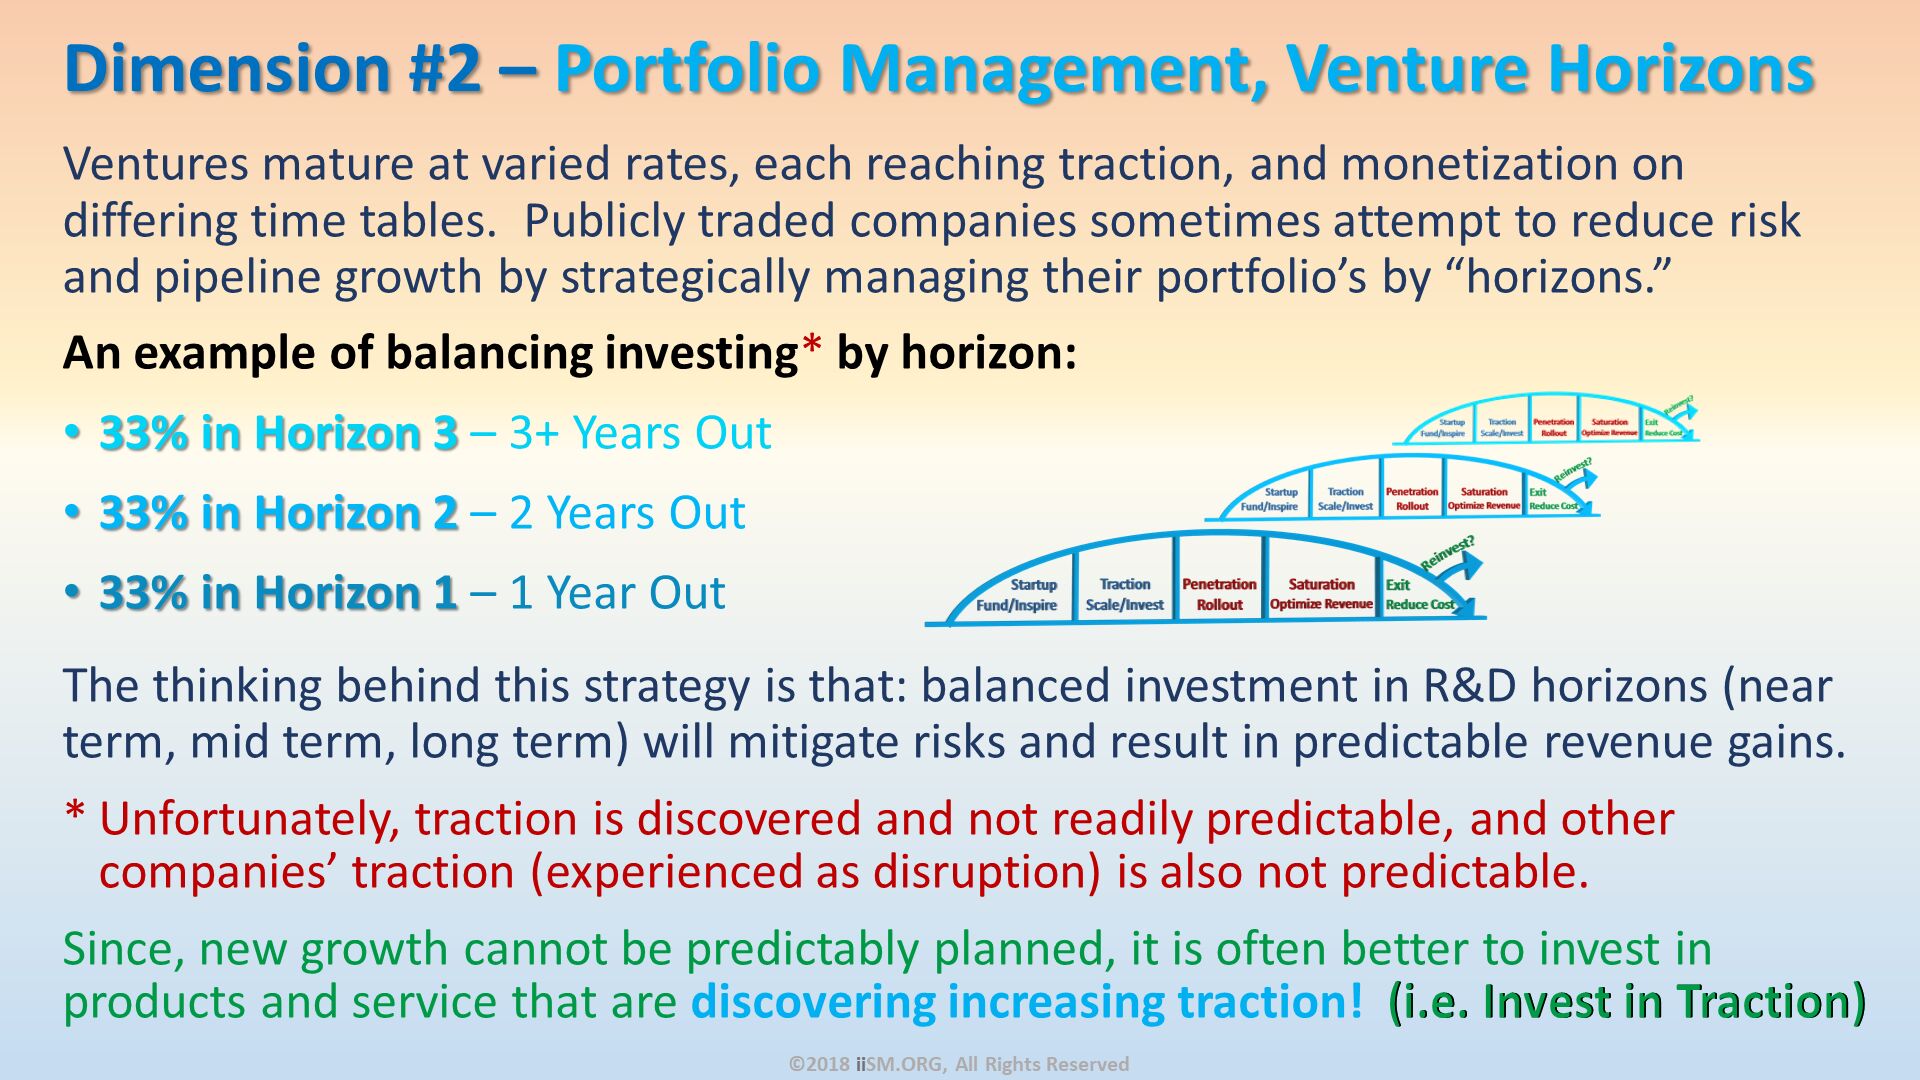 Ventures mature at varied rates, each reaching traction, and monetization on differing time tables.  Publicly traded companies sometimes attempt to reduce risk and pipeline growth by strategically managing their portfolio’s by “horizons.” 
An example of balancing investing* by horizon:
33% in Horizon 3 – 3+ Years Out
33% in Horizon 2 – 2 Years Out 
33% in Horizon 1 – 1 Year Out
The thinking behind this strategy is that: balanced investment in R&D horizons (near term, mid term, long term) will mitigate risks and result in predictable revenue gains.  
Unfortunately, traction is discovered and not readily predictable, and other companies’ traction (experienced as disruption) is also not predictable.  
Since, new growth cannot be predictably planned, it is often better to invest in products and service that are discovering increasing traction!  (i.e. Invest in Traction). Dimension #2 – Portfolio Management, Venture Horizons. ©2018 iiSM.ORG, All Rights Reserved. 